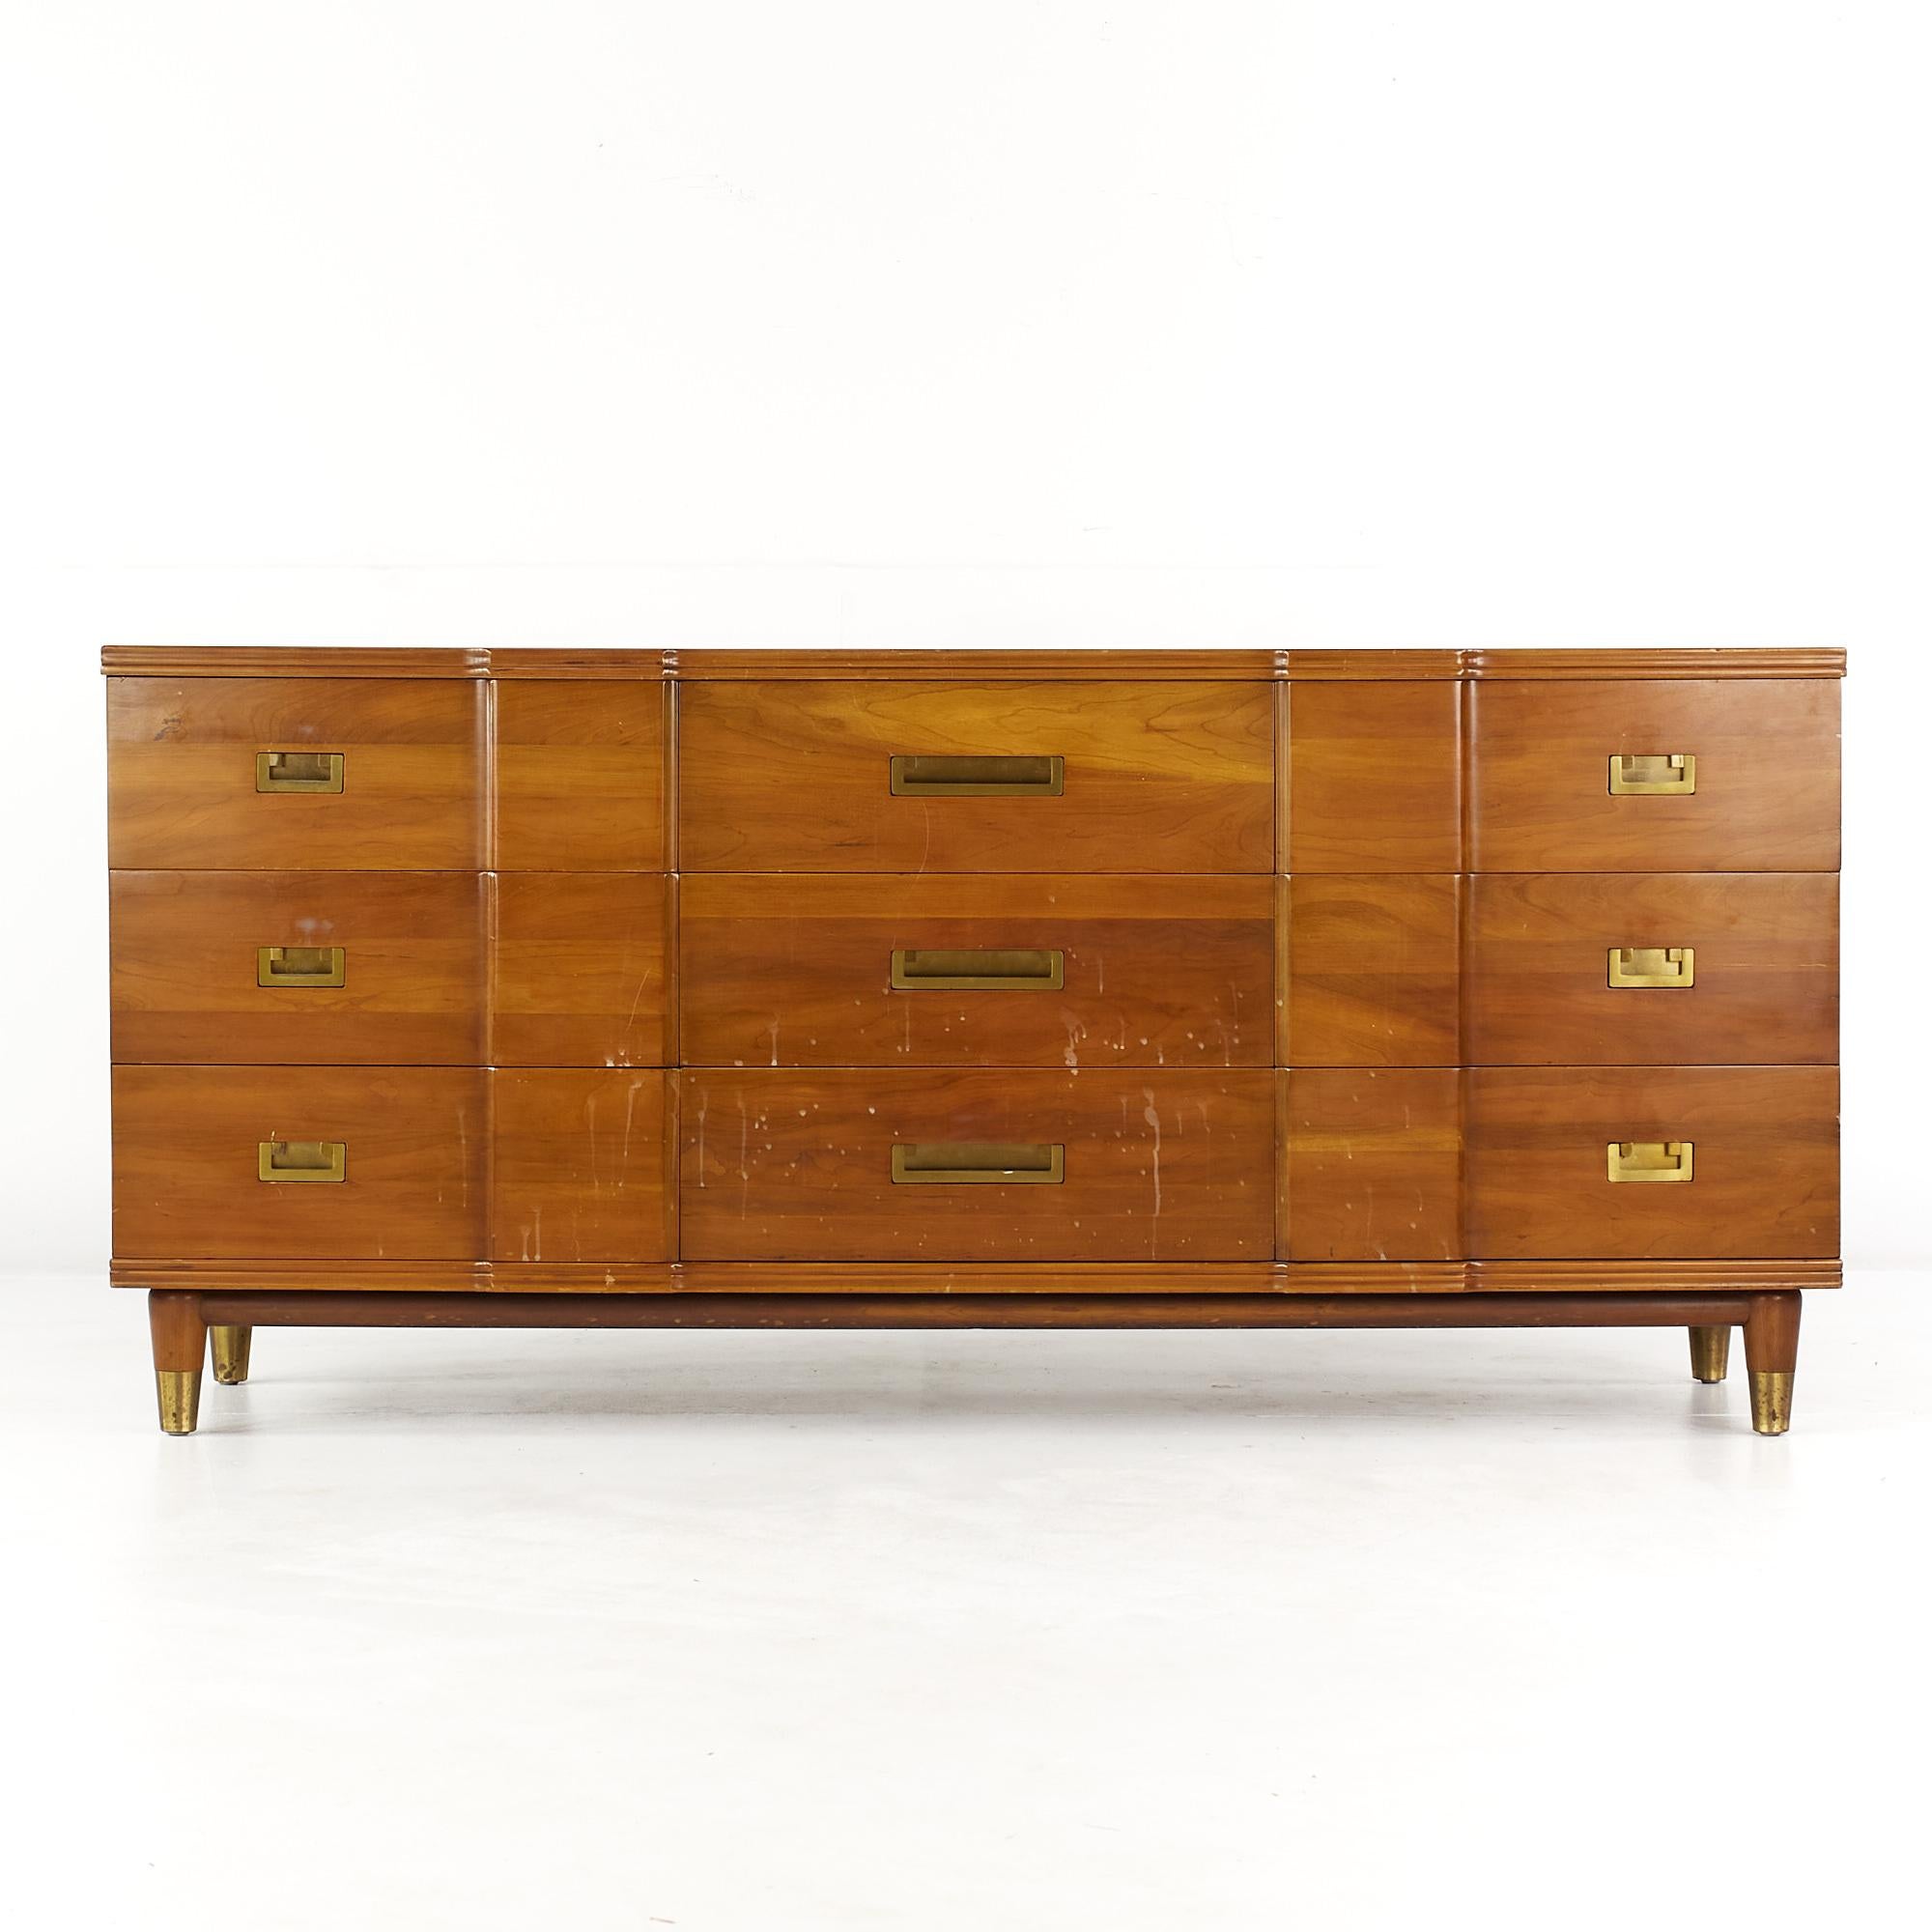 John Widdicomb Mid Century walnut and brass 9 drawer lowboy dresser

This dresser measures: 70.25 wide x 21 deep x 32 inches high

All pieces of furniture can be had in what we call restored vintage condition. That means the piece is restored